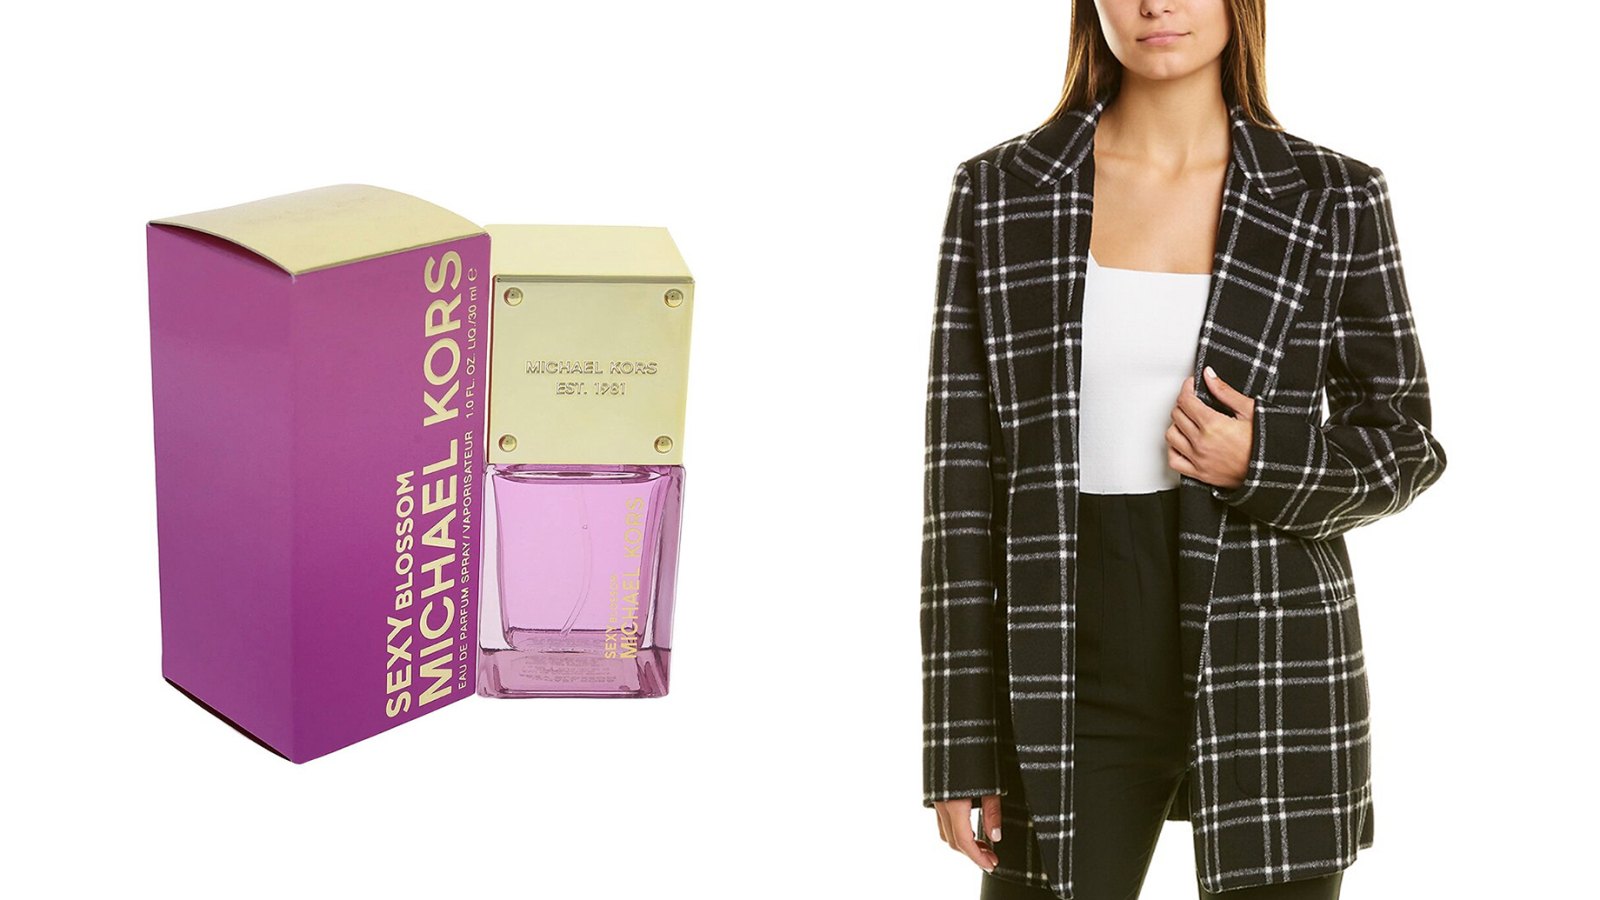 Michael Kors Fashion Must-Haves Are Up to 88% Off at Gilt